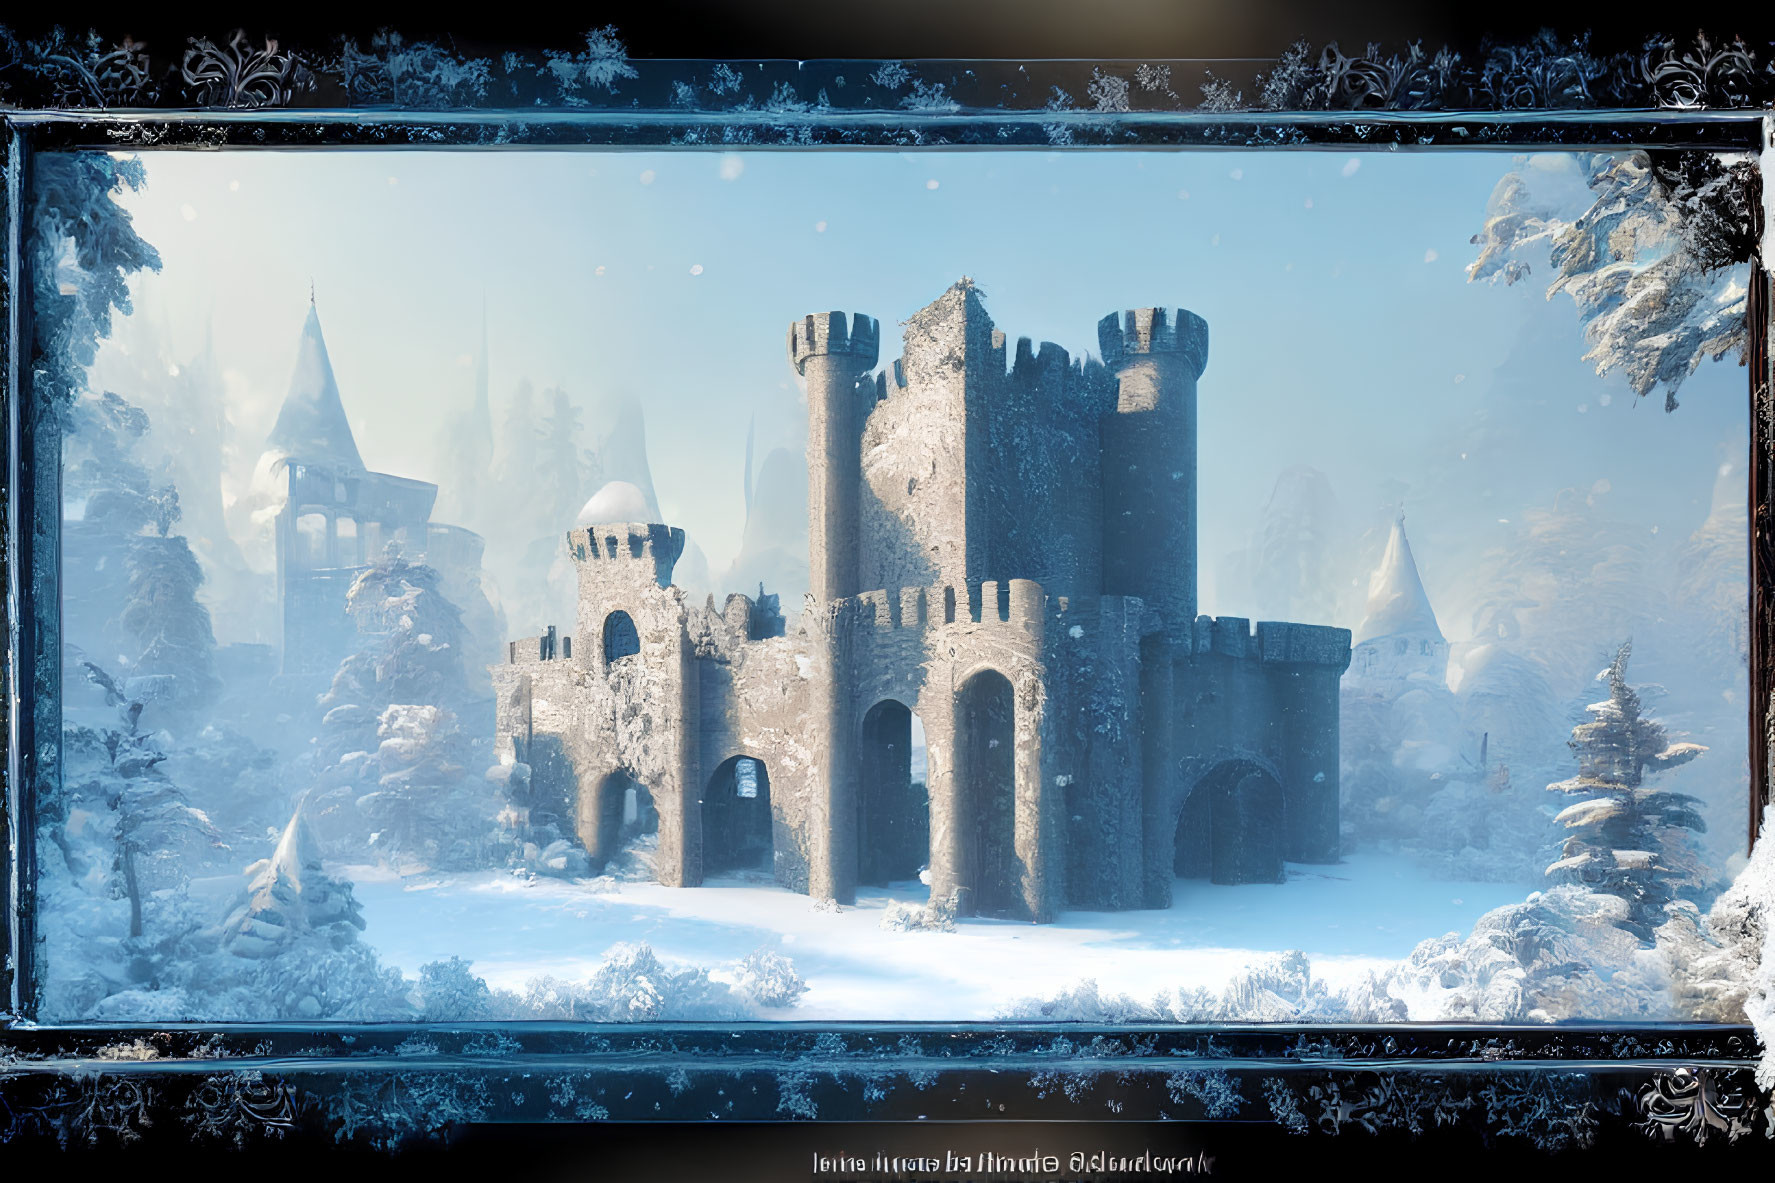 Snowy medieval castle in frosted tree landscape - winter ambiance.